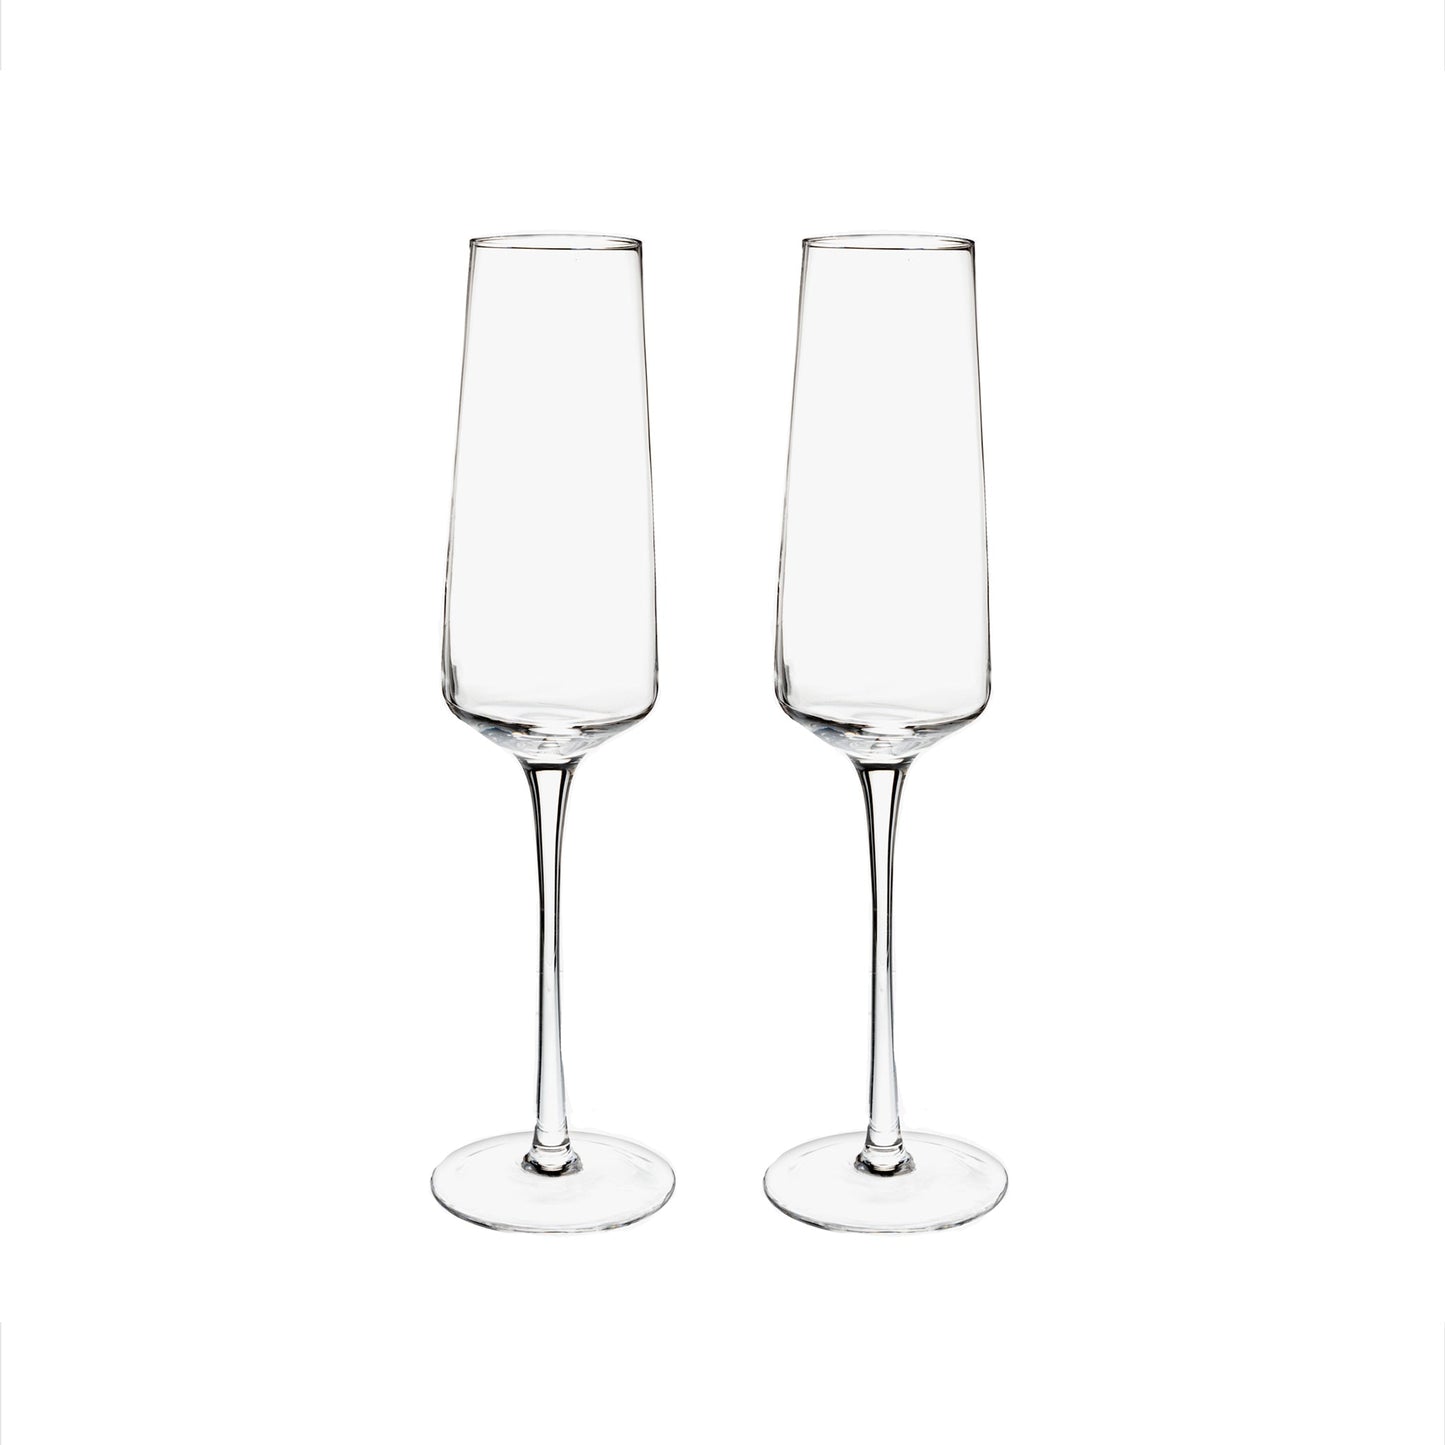 Classic Champagne Flutes Set - 9 oz by Creative Gifts